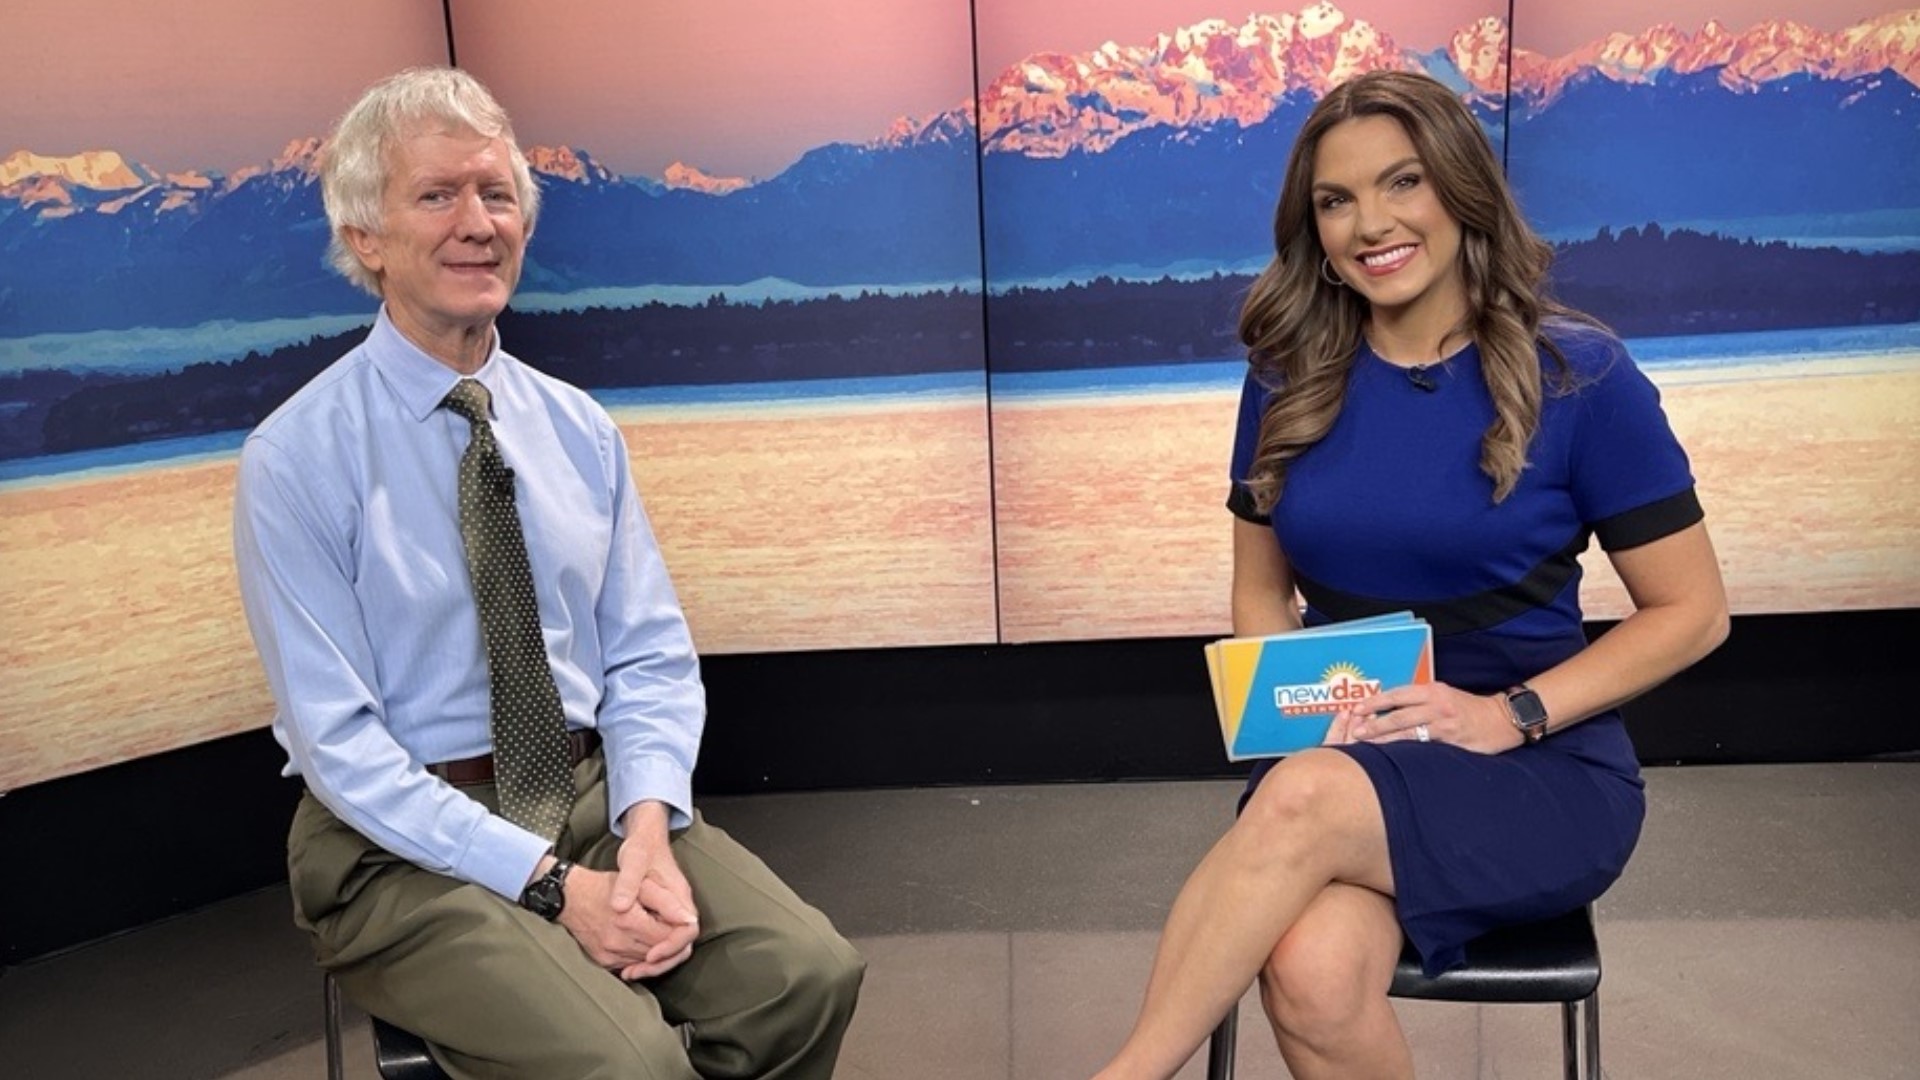 Providence Swedish has the largest Multiple Sclerosis Center in the Northwest. Dr. James Bown discusses how the center can help. Sponsored by Providence Swedish.